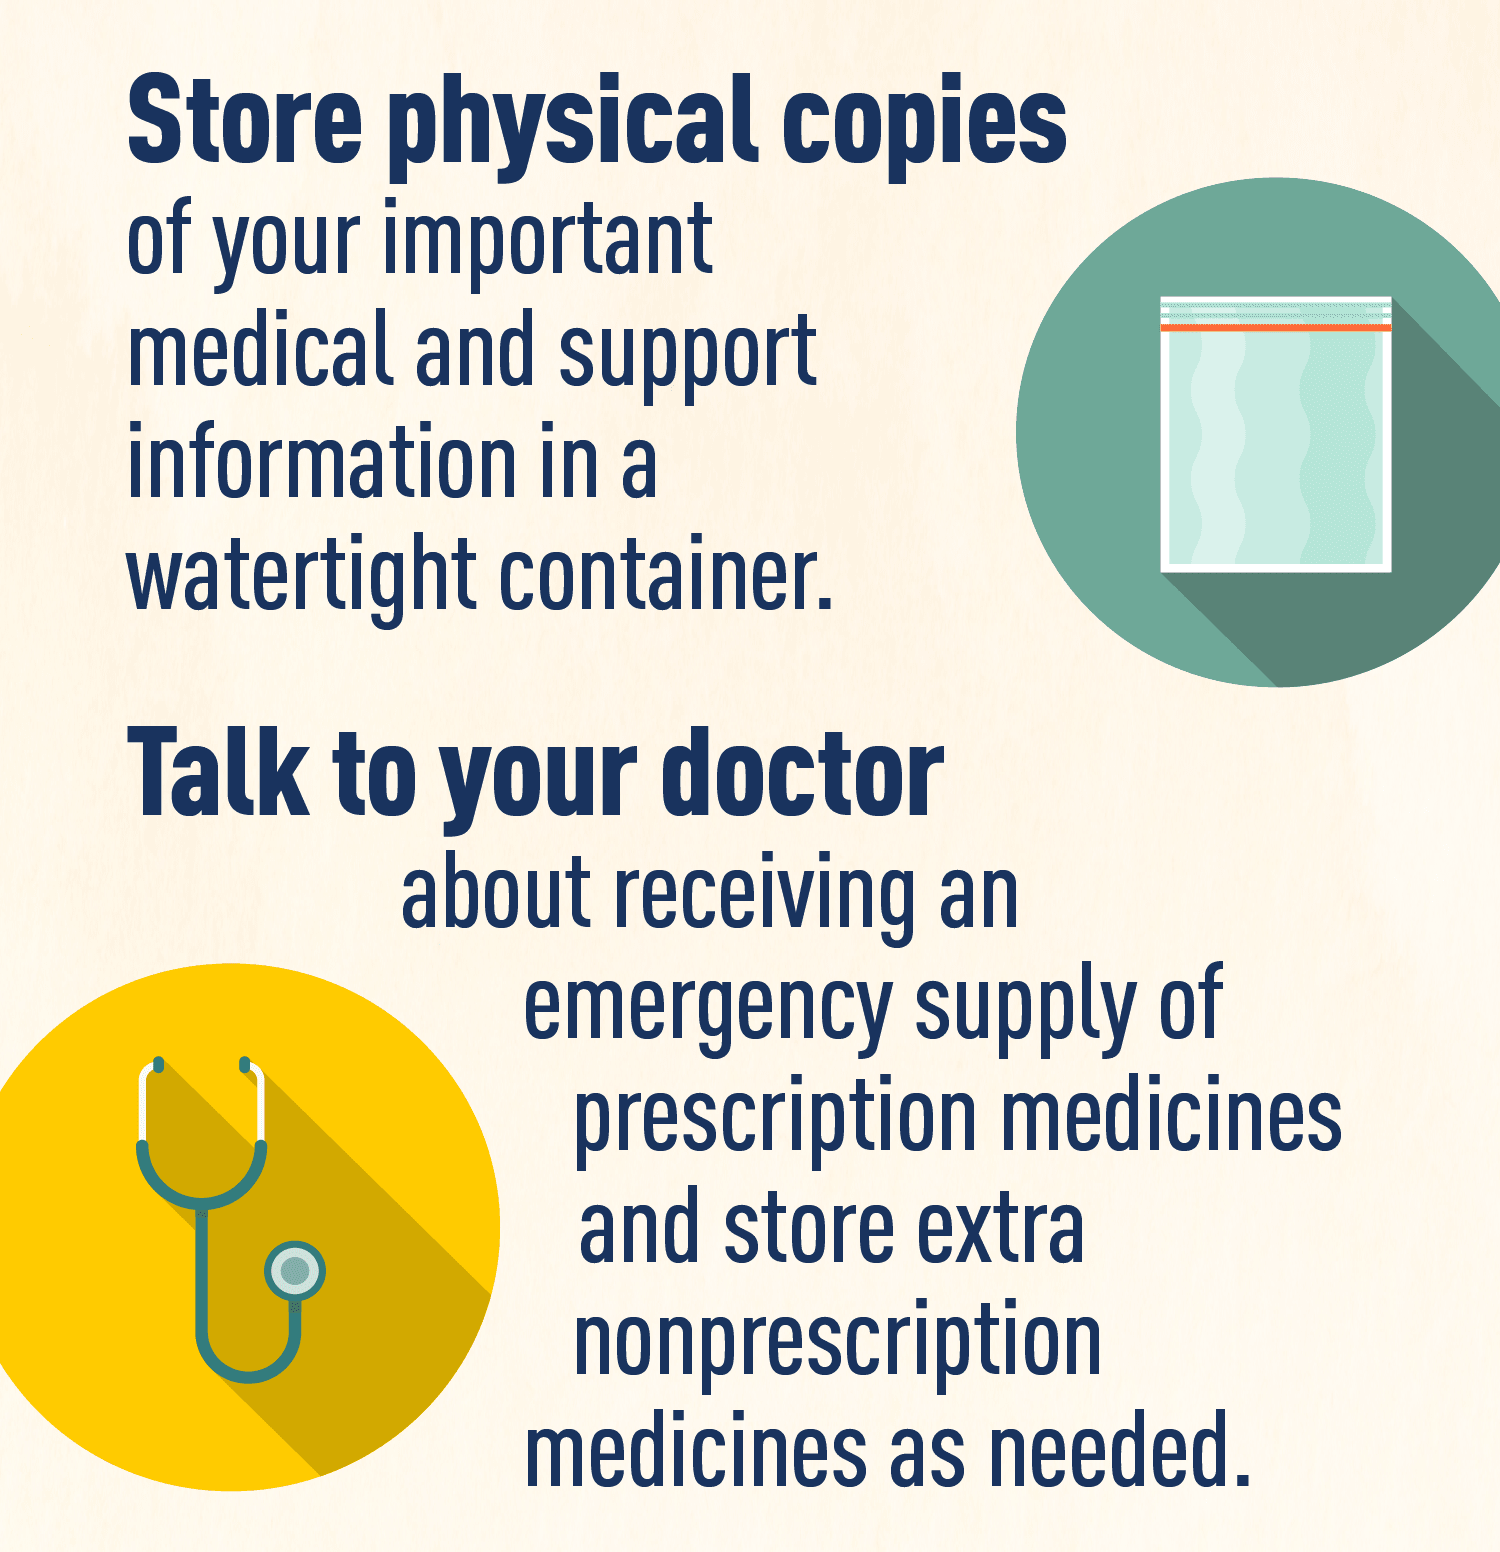 Graphic of plastic bag and stethoscope. Text: Store physical copies of your important medical and support information in a watertight container. Talk to your doctor about receiving an emergency supply of prescription medicines and store extra nonprescription medicines as needed.